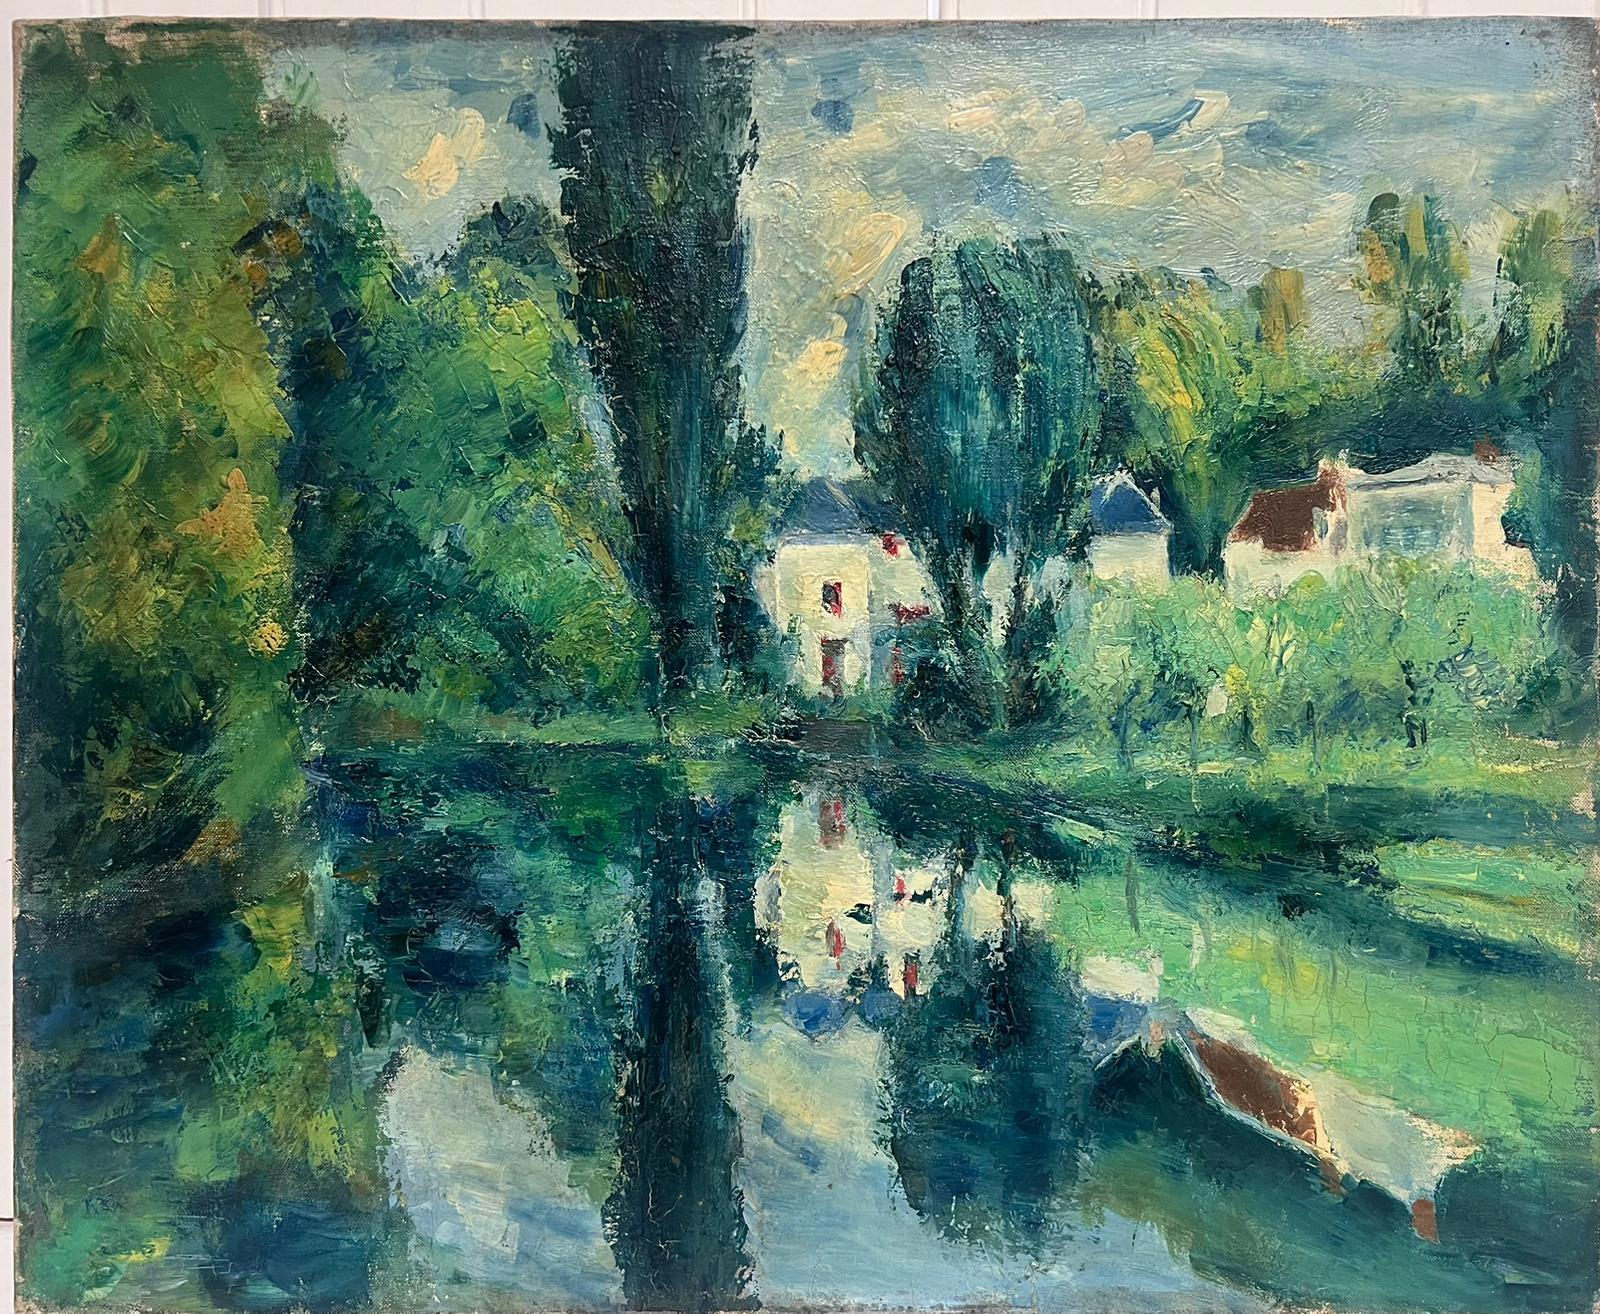 The River Meadows
French Impressionist artist, 1930's period
oil on canvas, unframed
canvas: 20 x 24 inches
provenance: private collection, France
condition: very good and sound condition